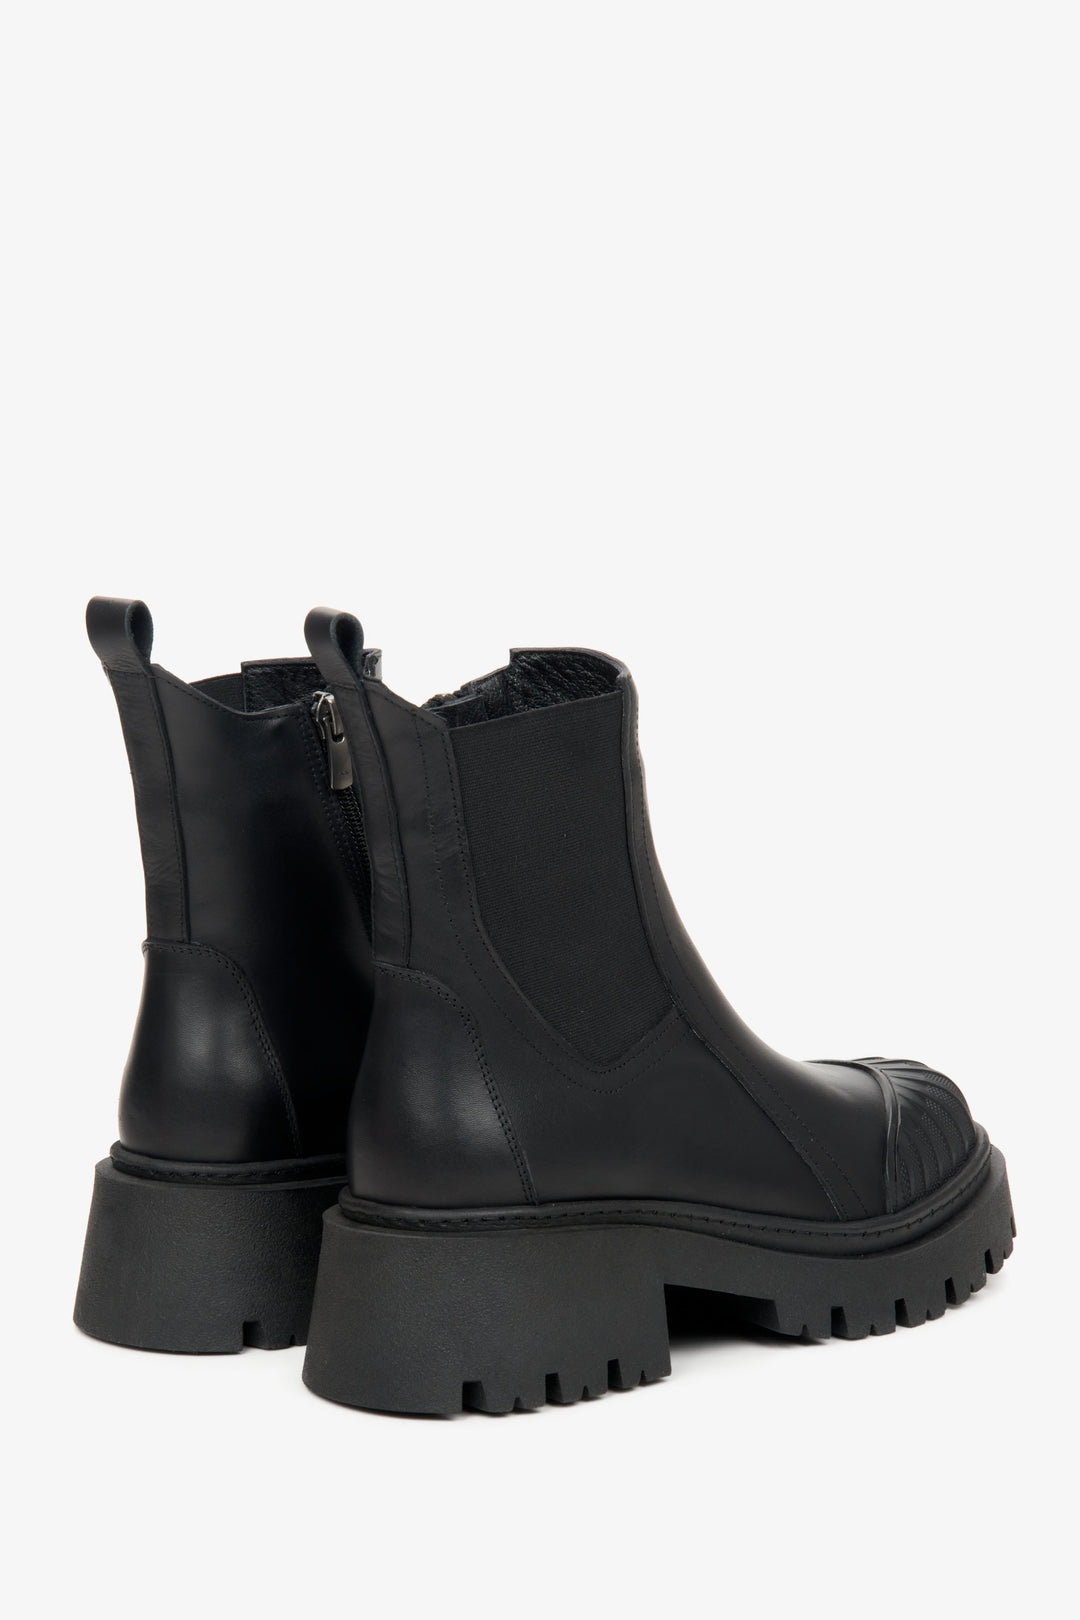 Black women's leather ankle boots by Estro - close-up on the side profile and heel of the model.